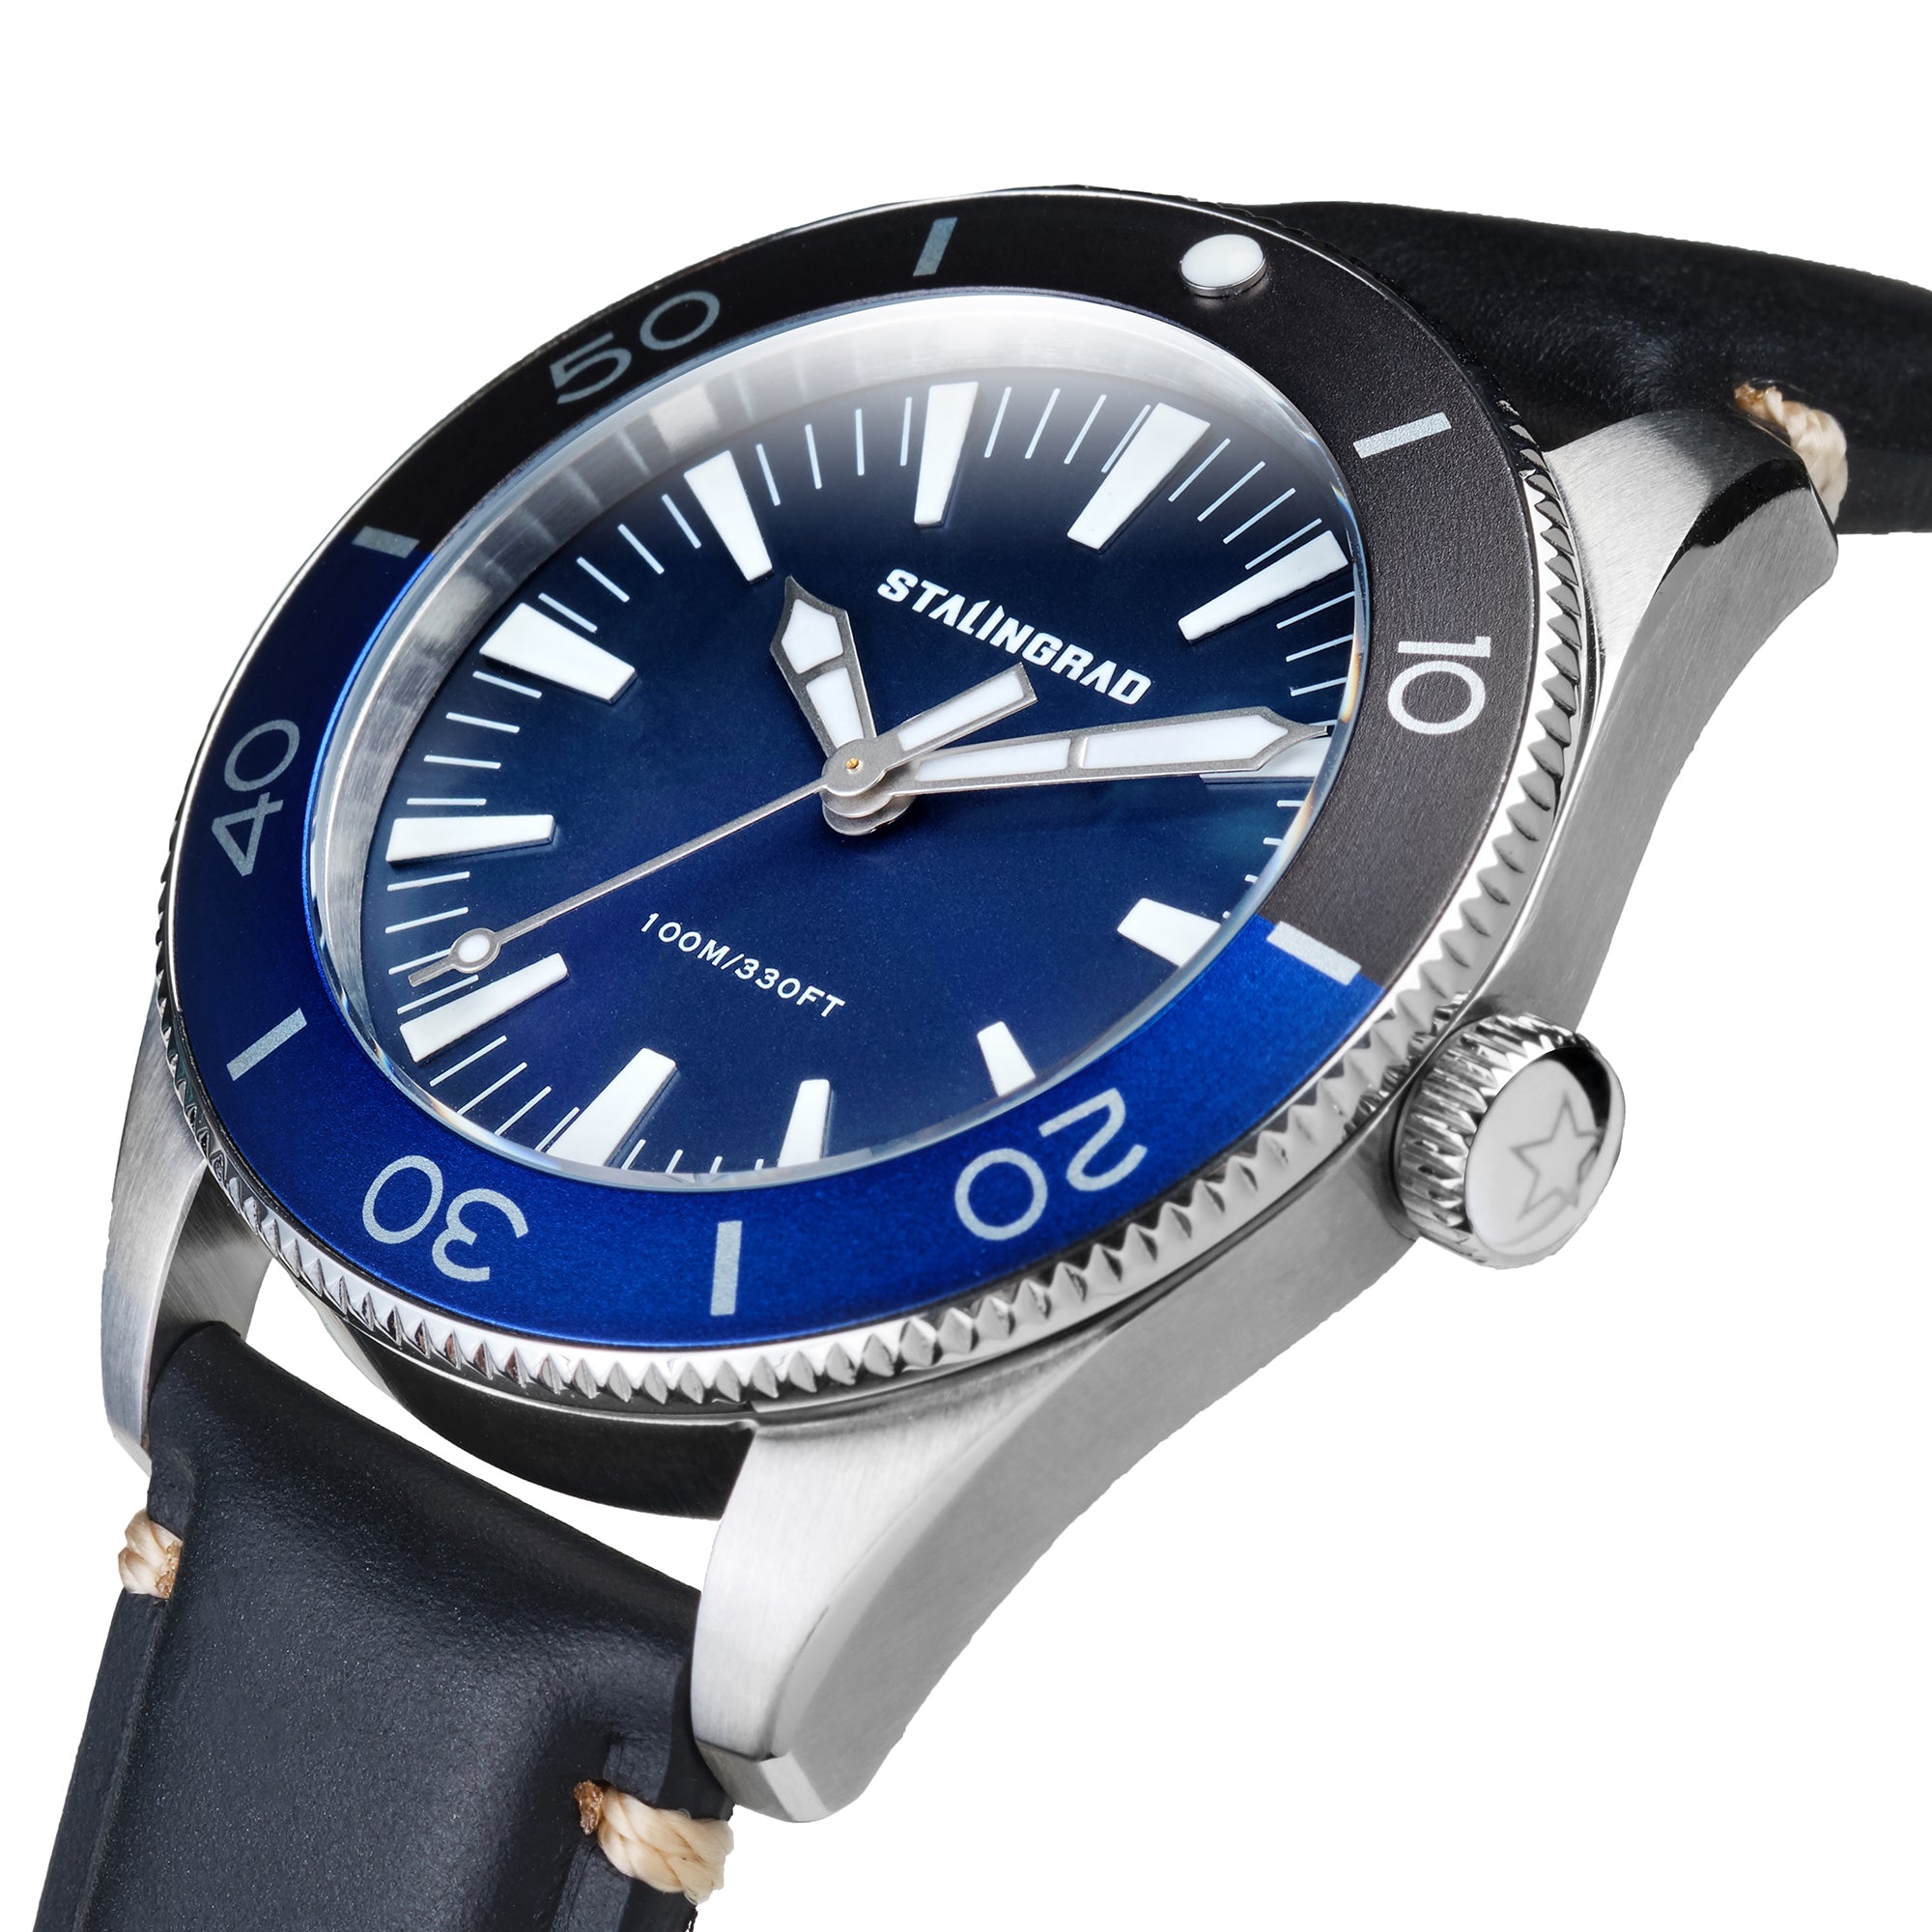 Stalingrad Iron Will Watch Blue Dial, with Black and blue 2 tone Bezel on a white background, Diagonal view